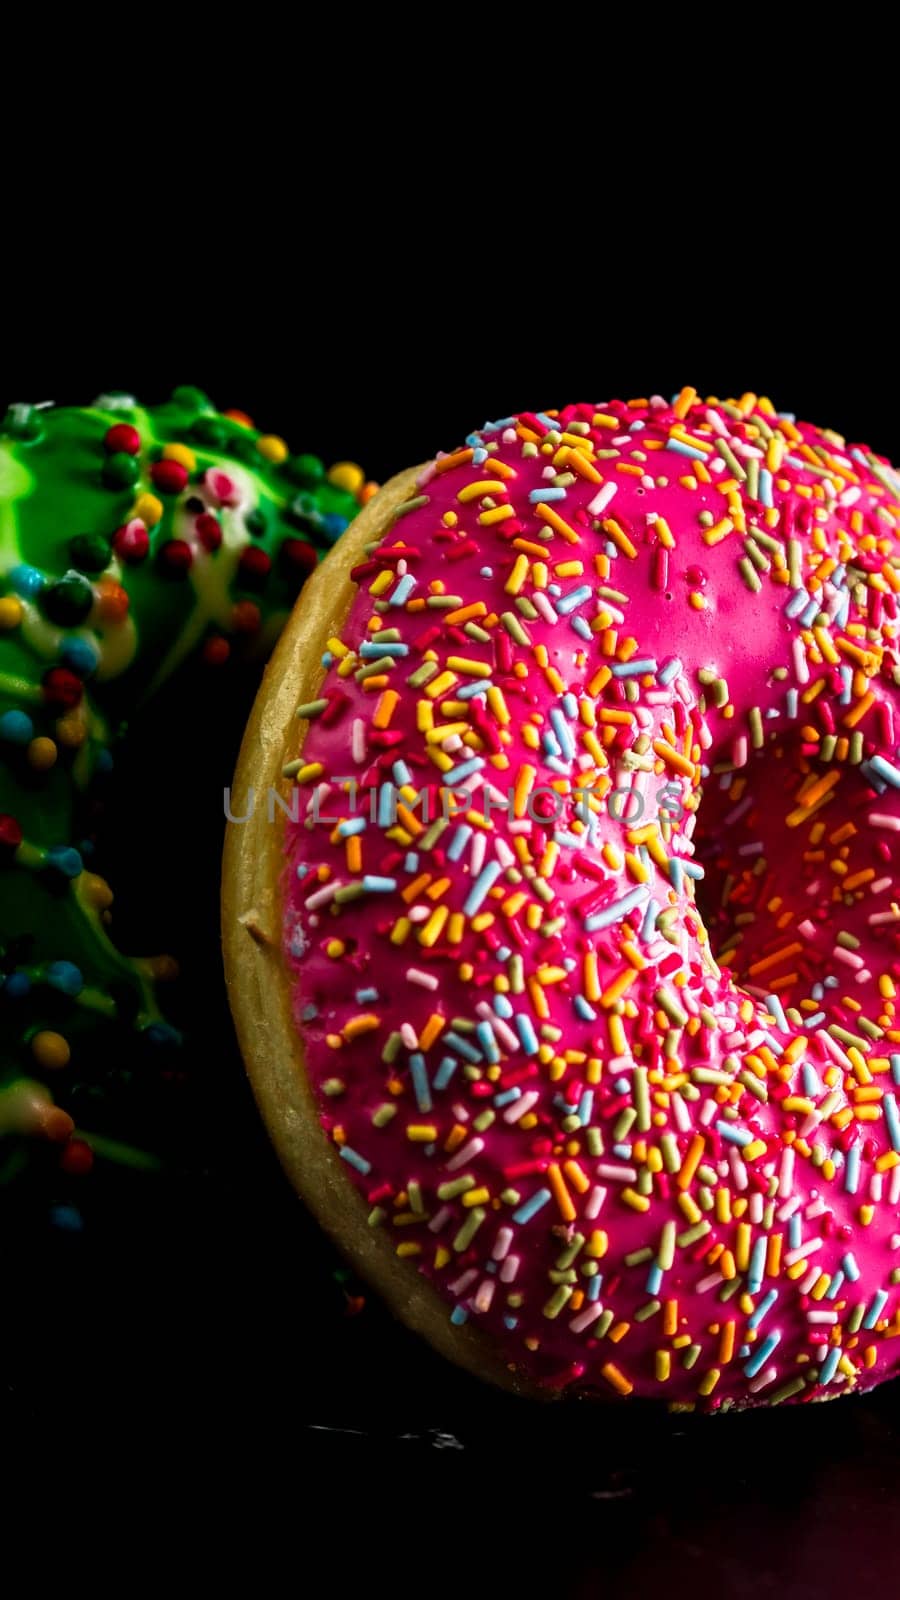  Glazed donuts with sprinkles isolated. Close up of colorful donuts. by vladispas